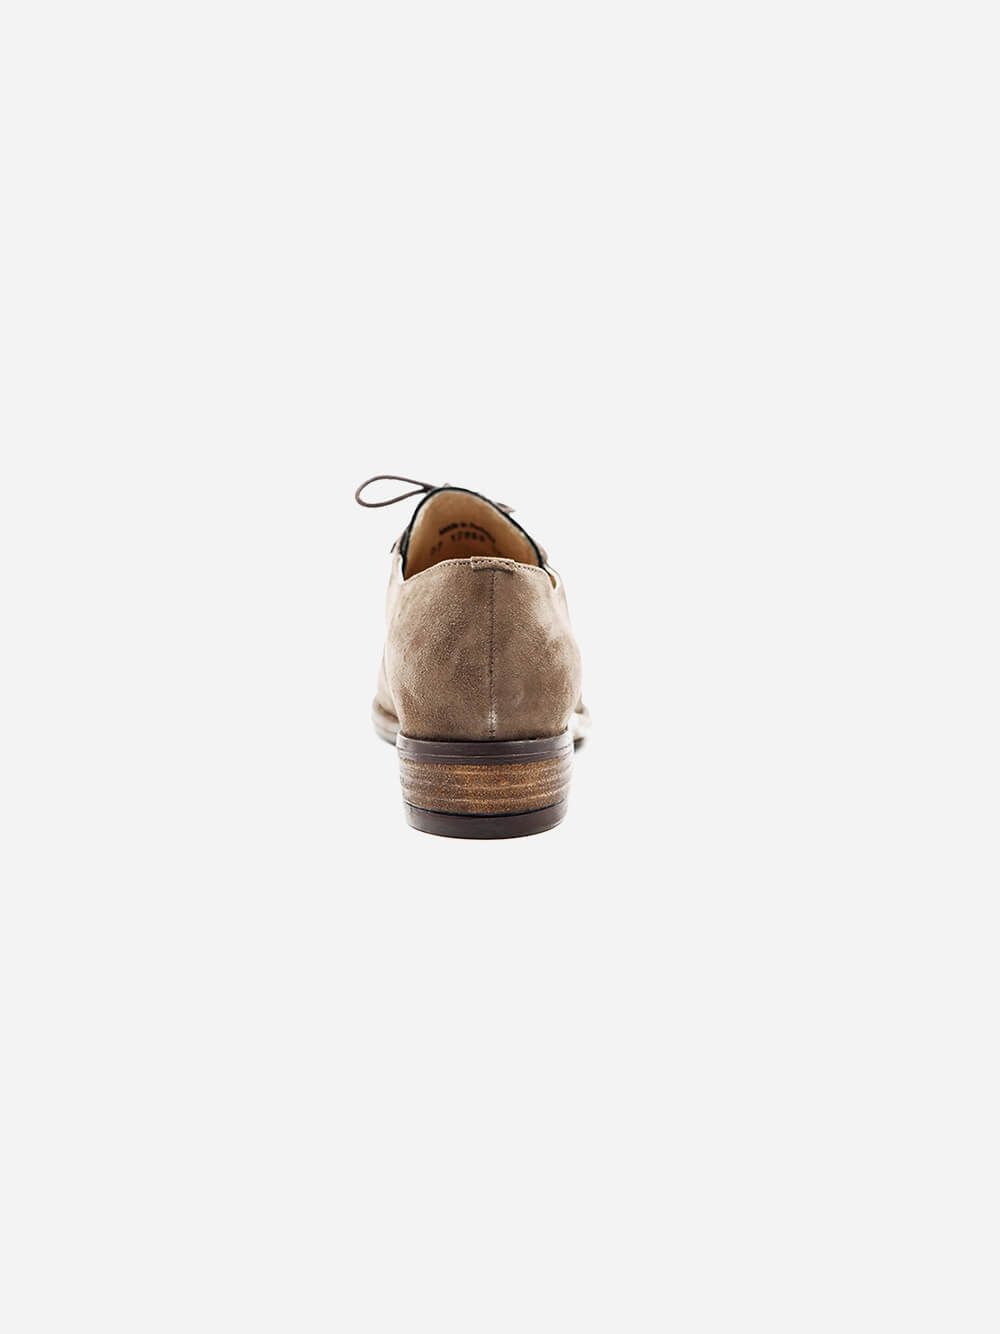 Percy Beige Shoes | Dkode